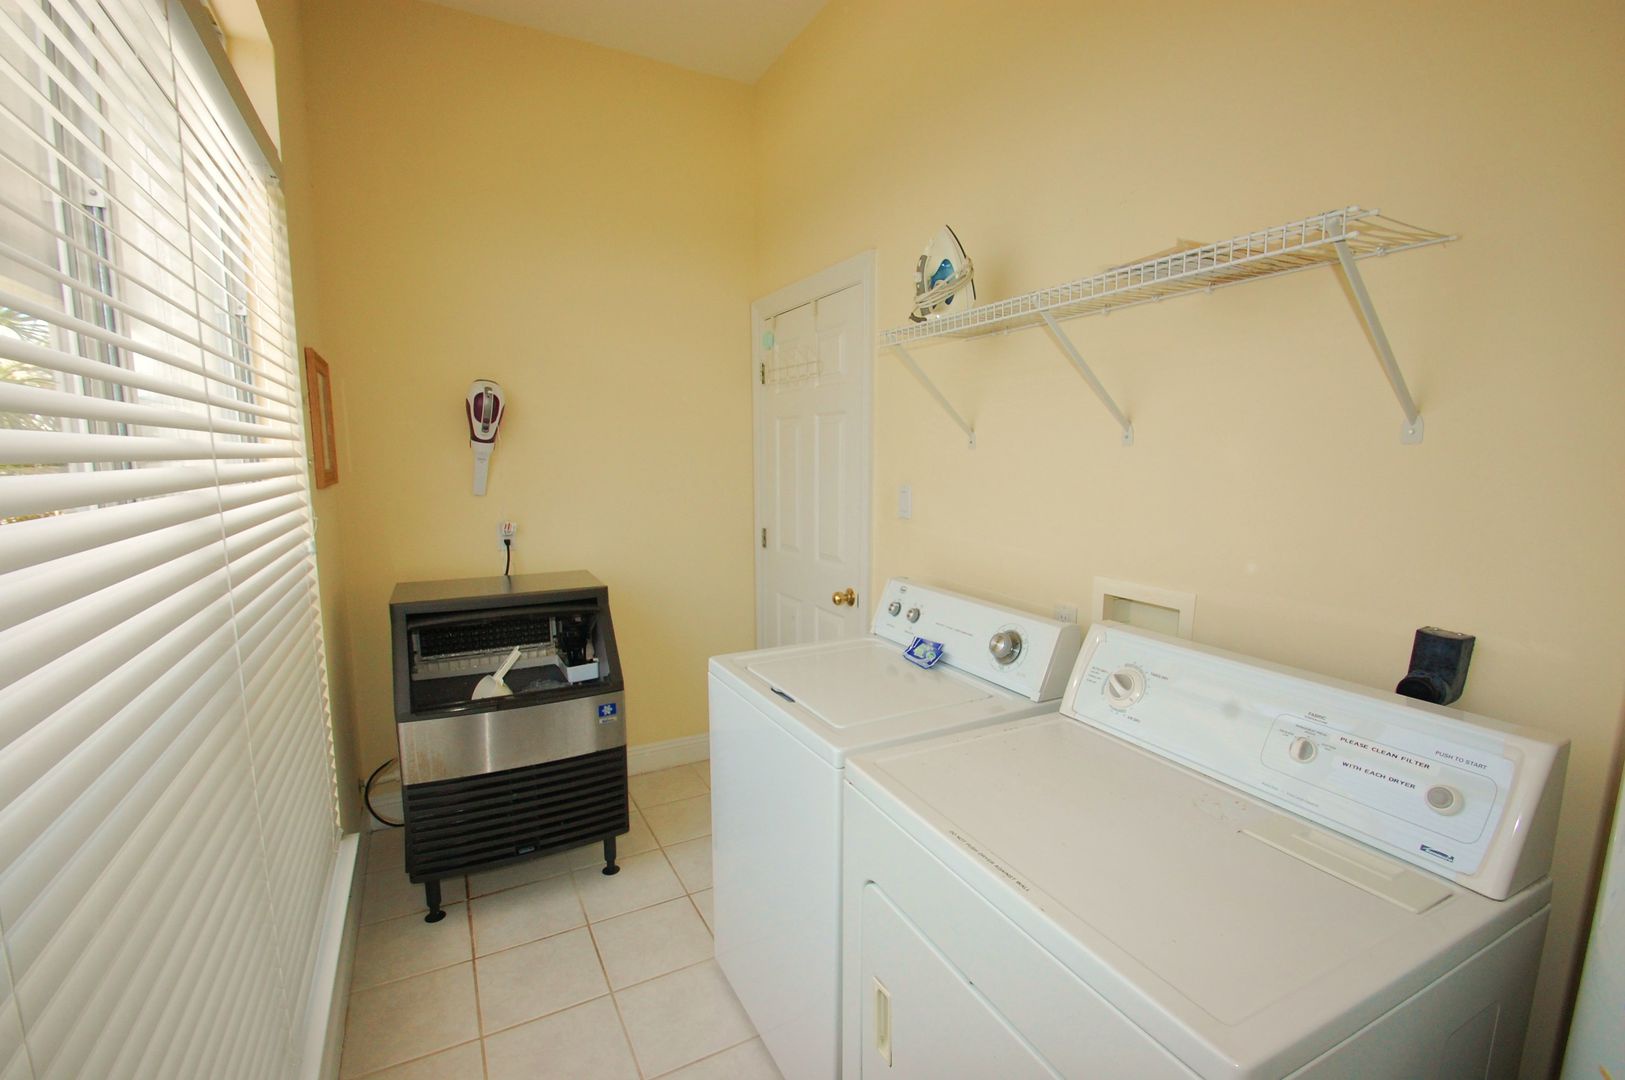 Large laundry room with dedicated ice maker